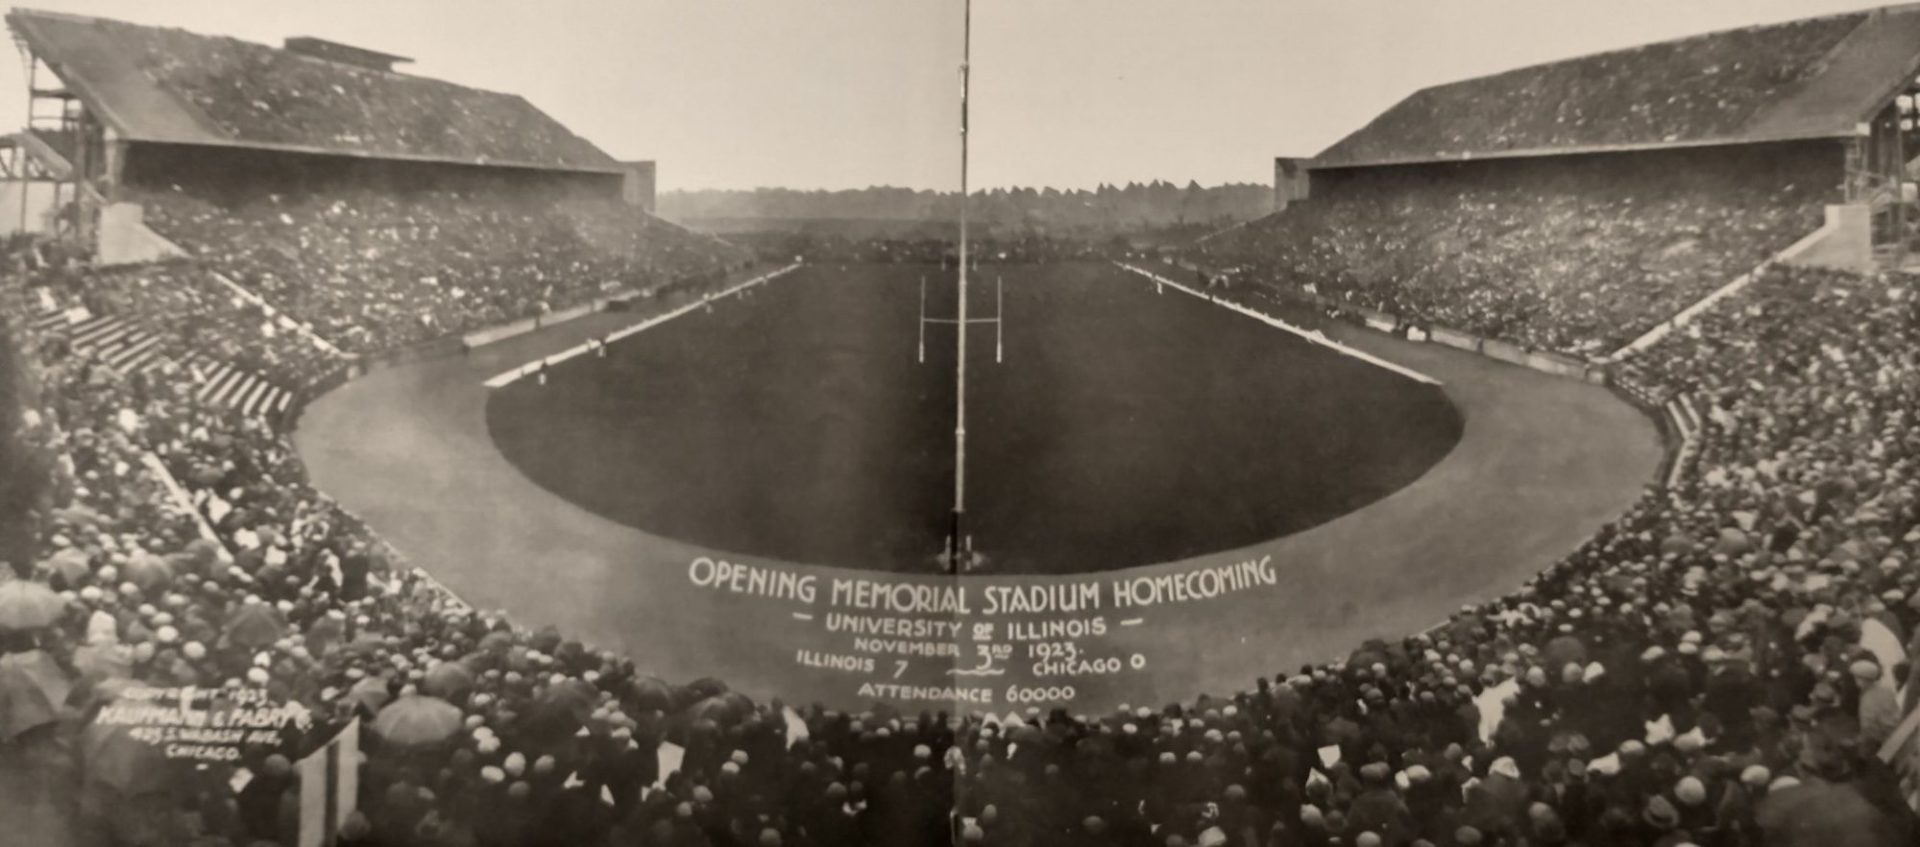 The first game at Memorial Stadium was 100 years ago today